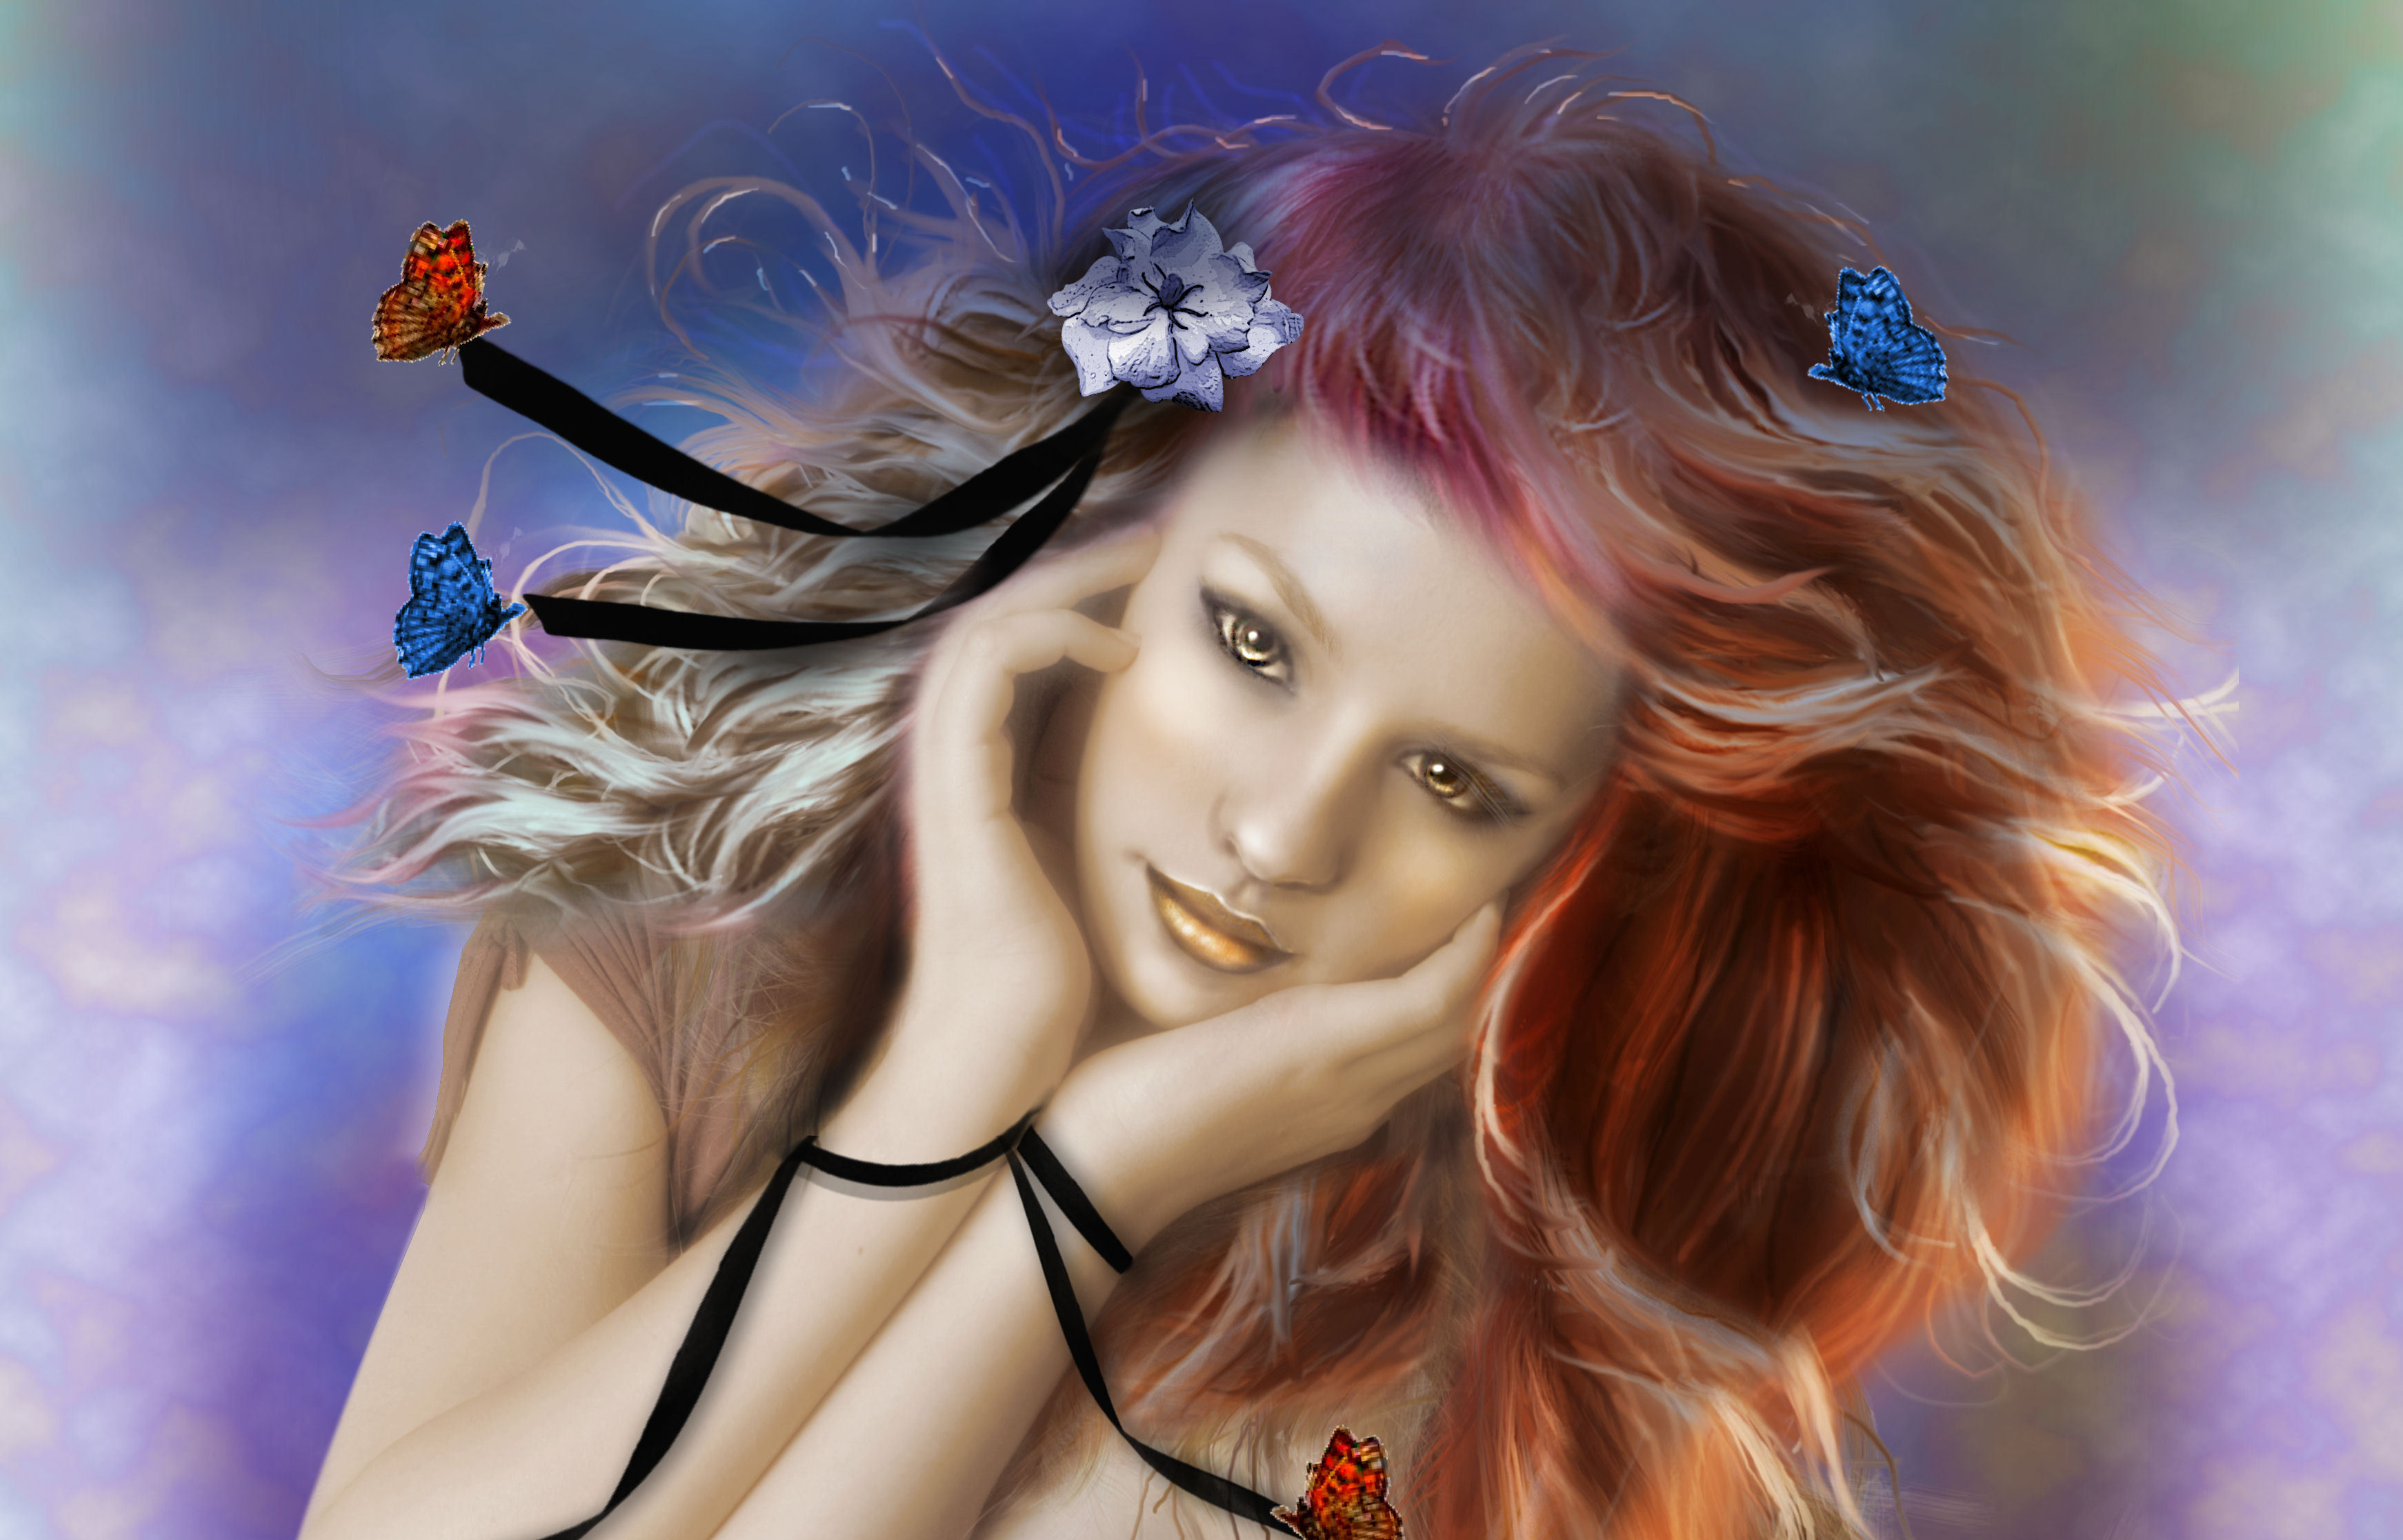 painting, Art, Girl, Eyes, Face, Hair, Butterflies, Arms, Ribbons, Flowers, Mood, Butterfly Wallpaper